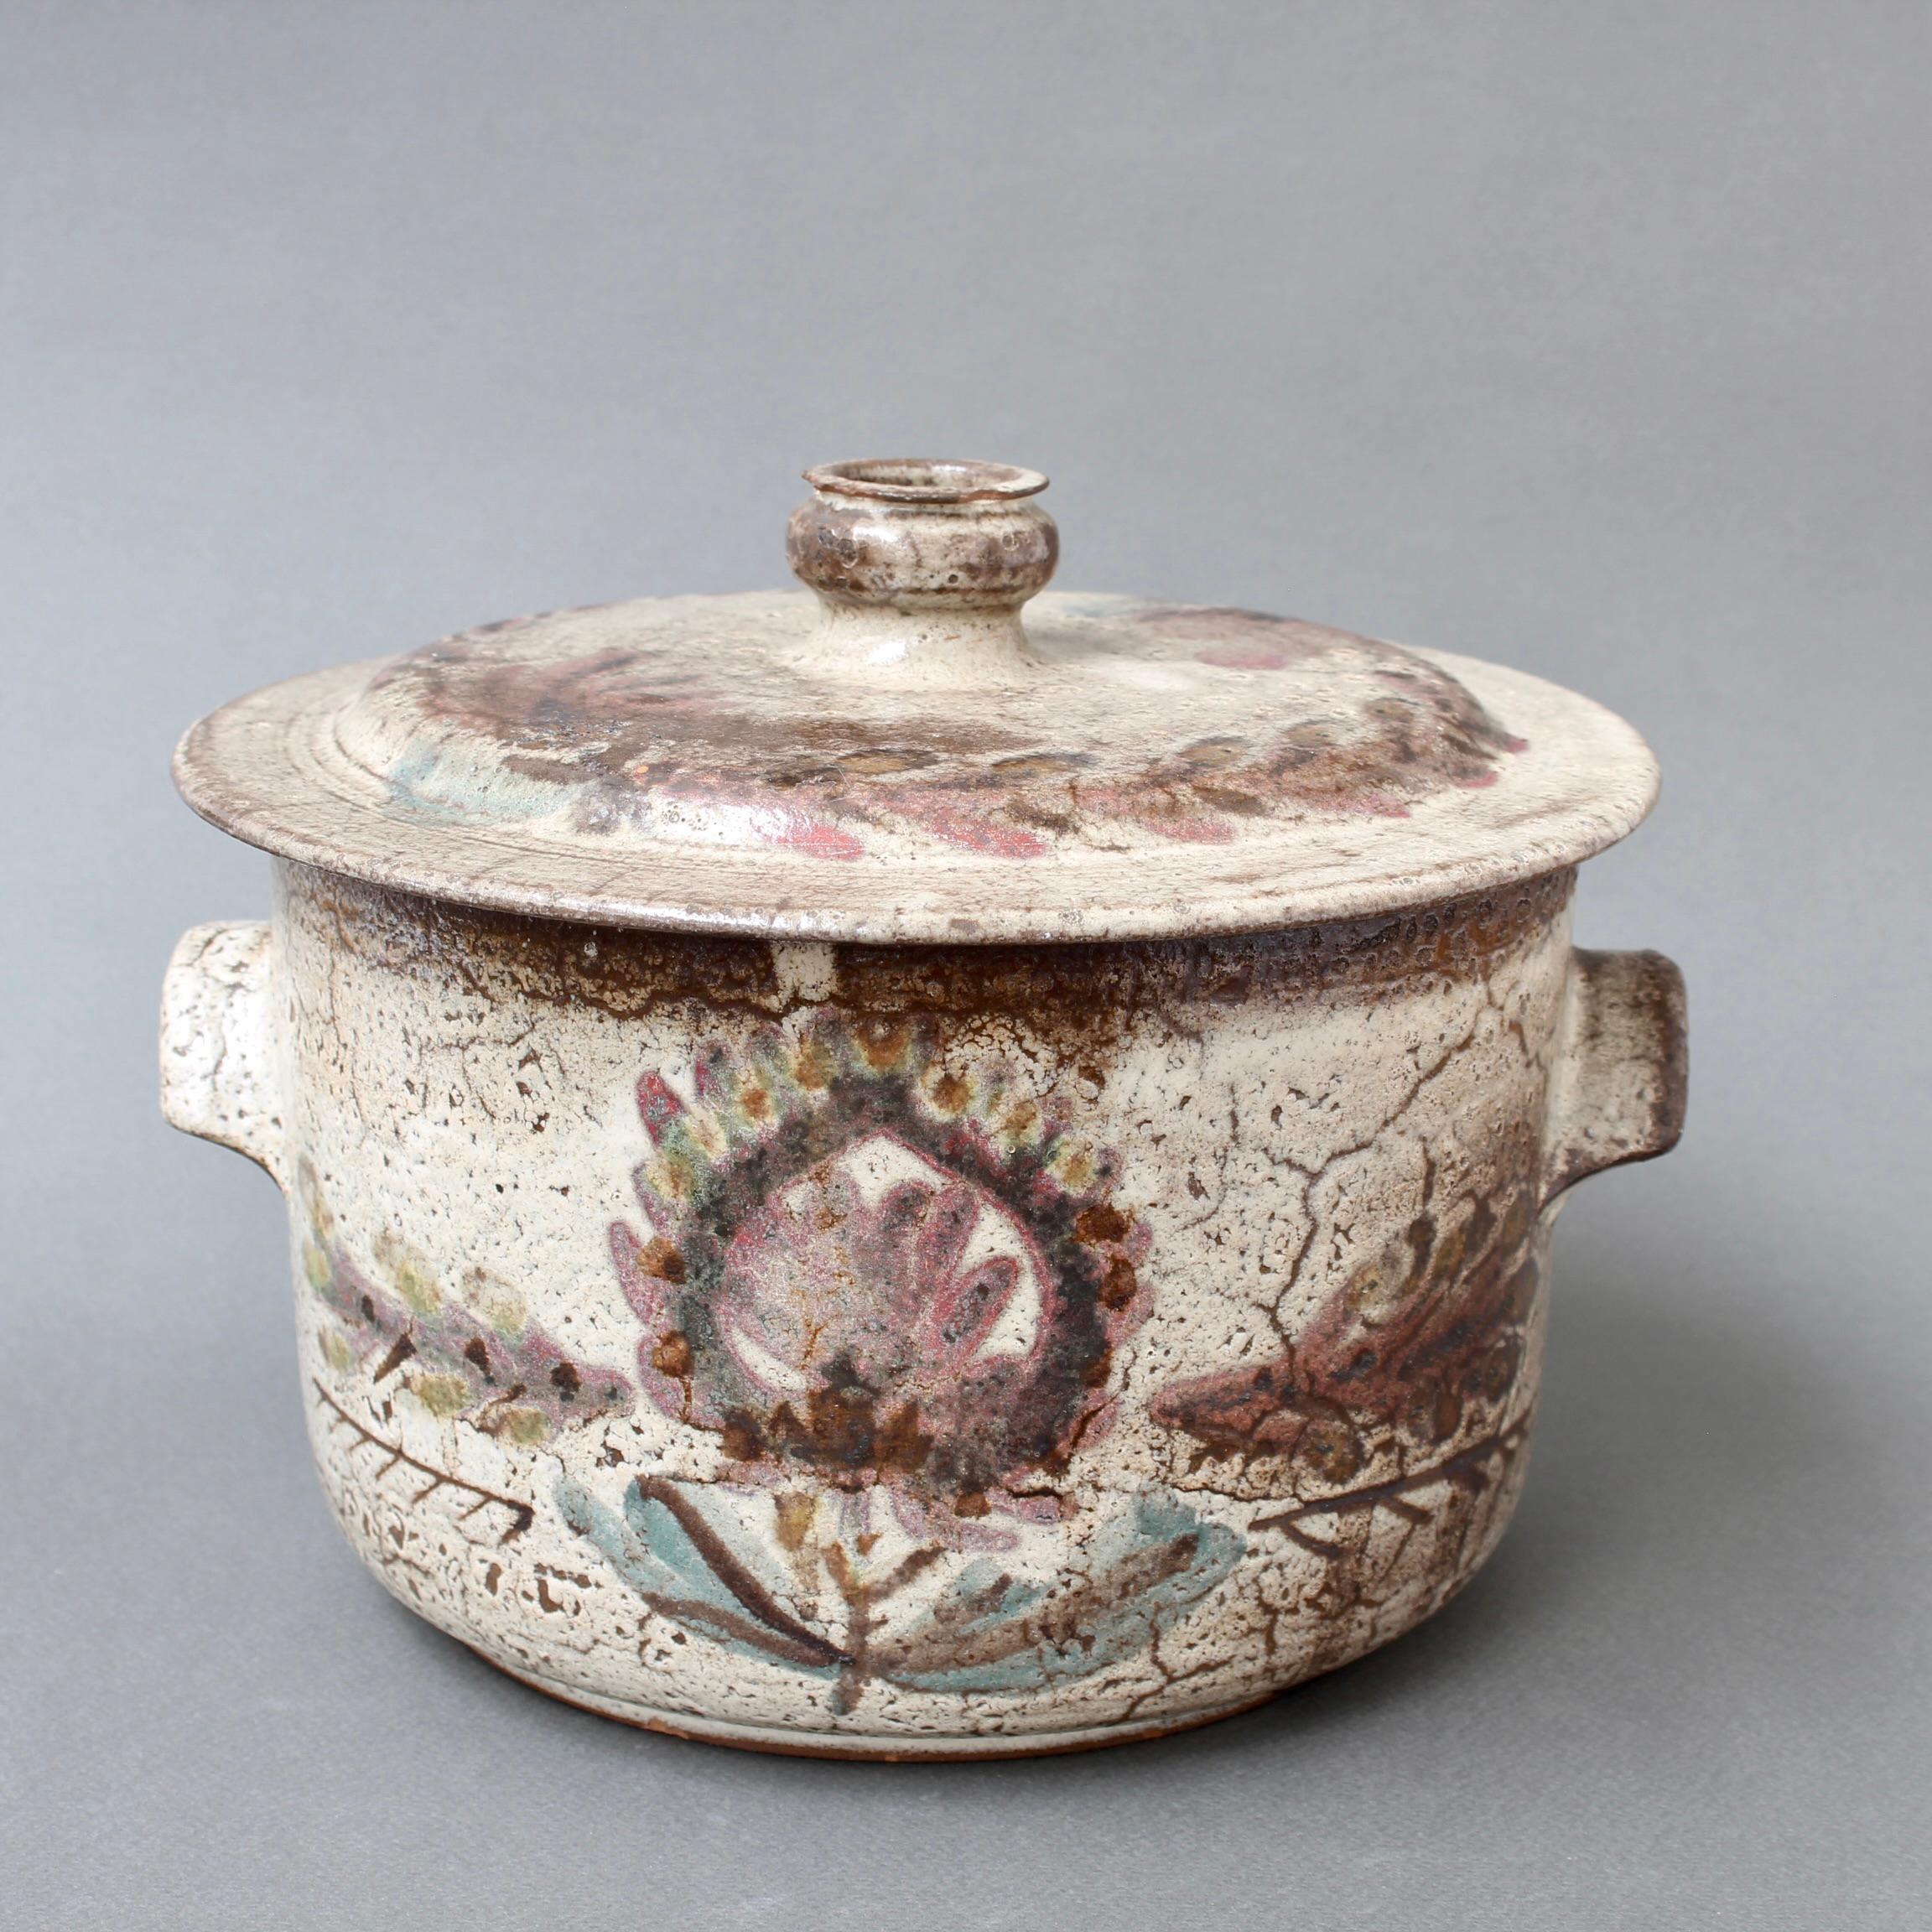 Hand-Painted Vintage French Ceramic Casserole with Lid by Gustave Reynaud - Le Mûrier For Sale